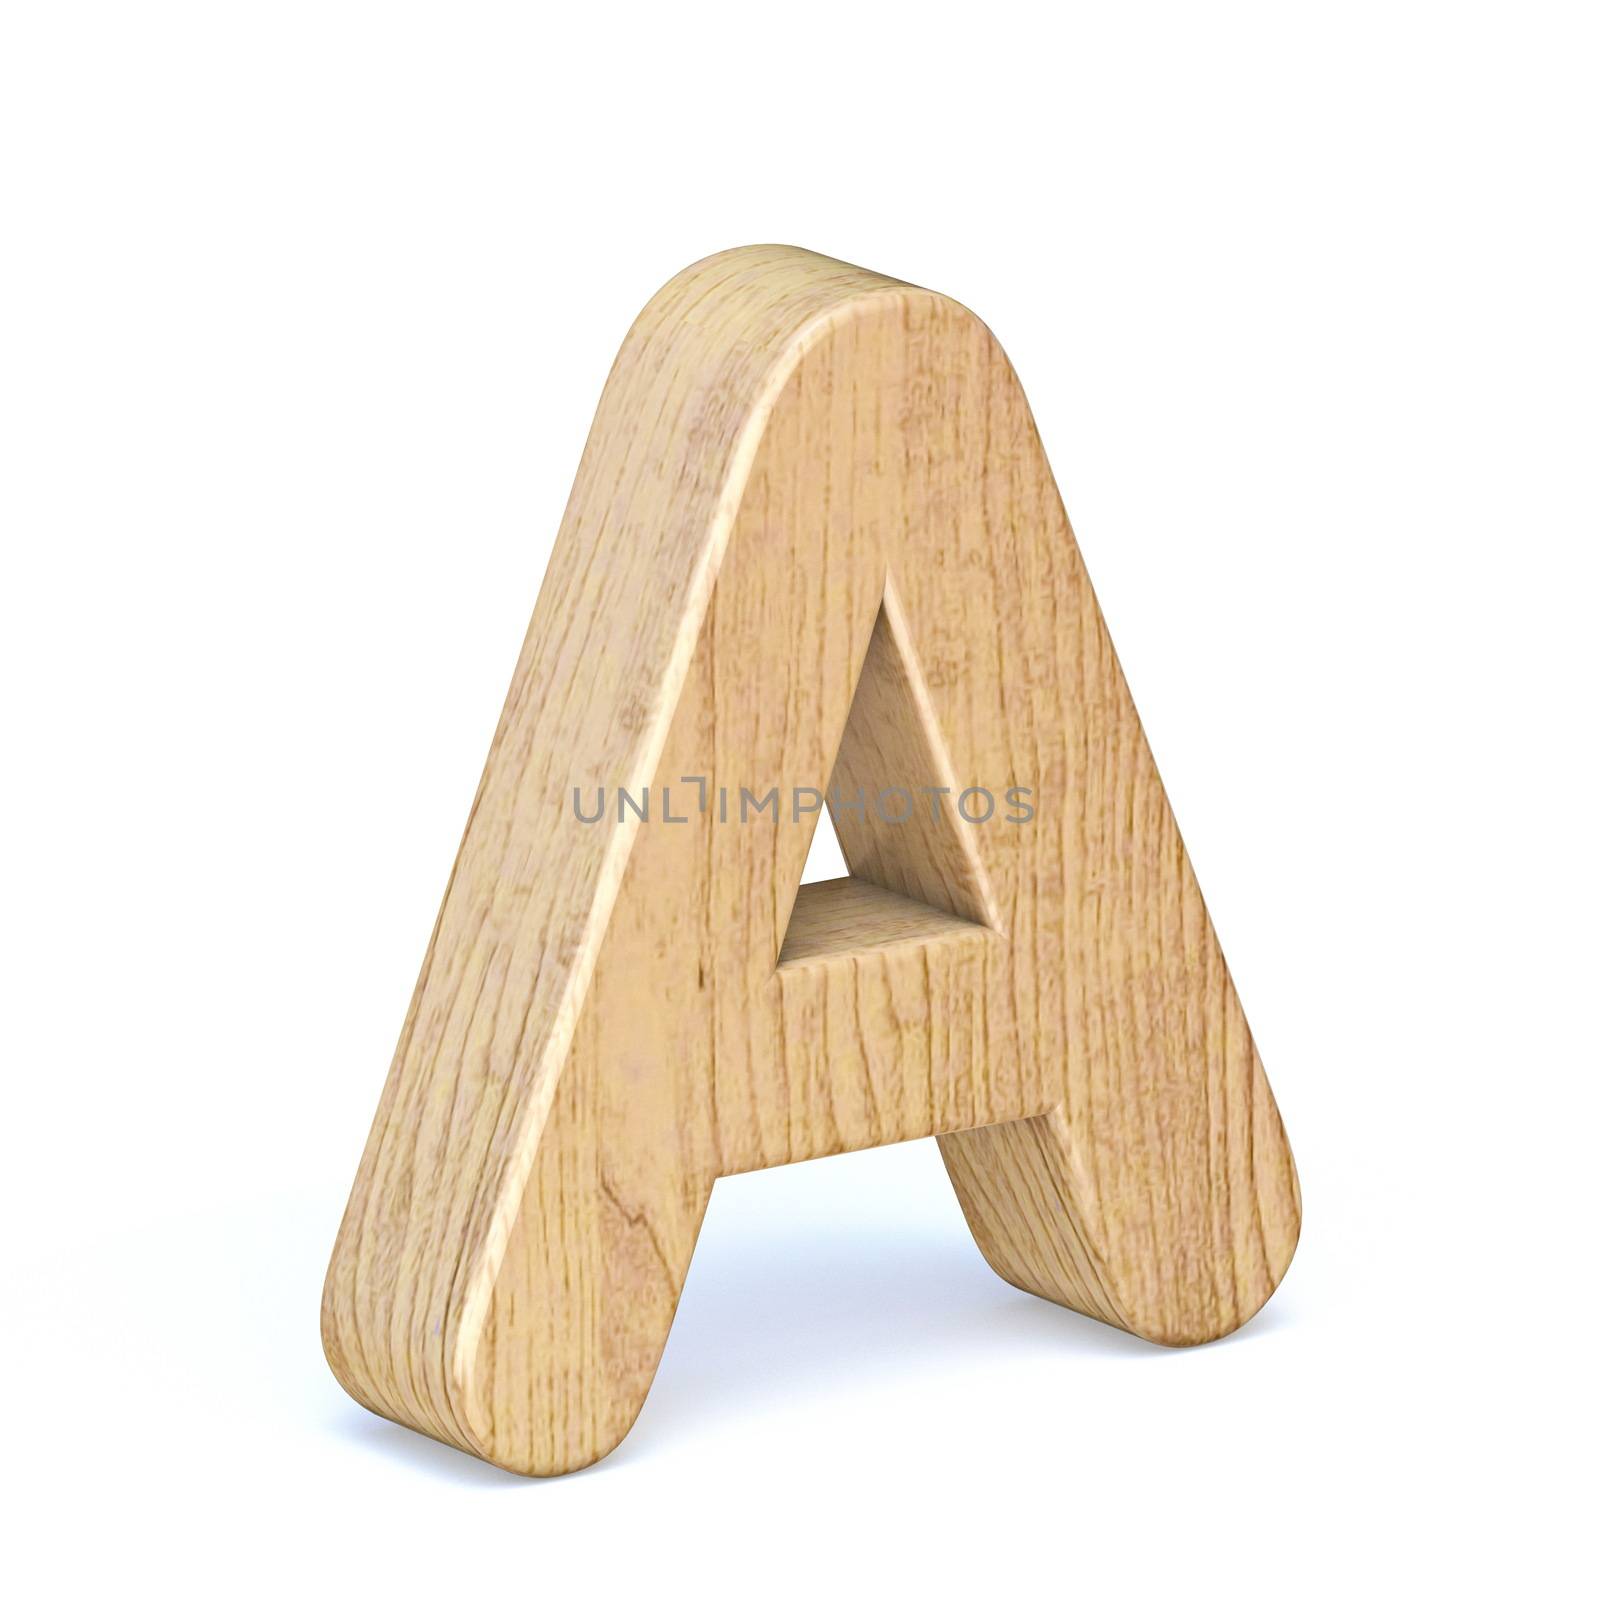 Rounded wooden font Letter A 3D by djmilic